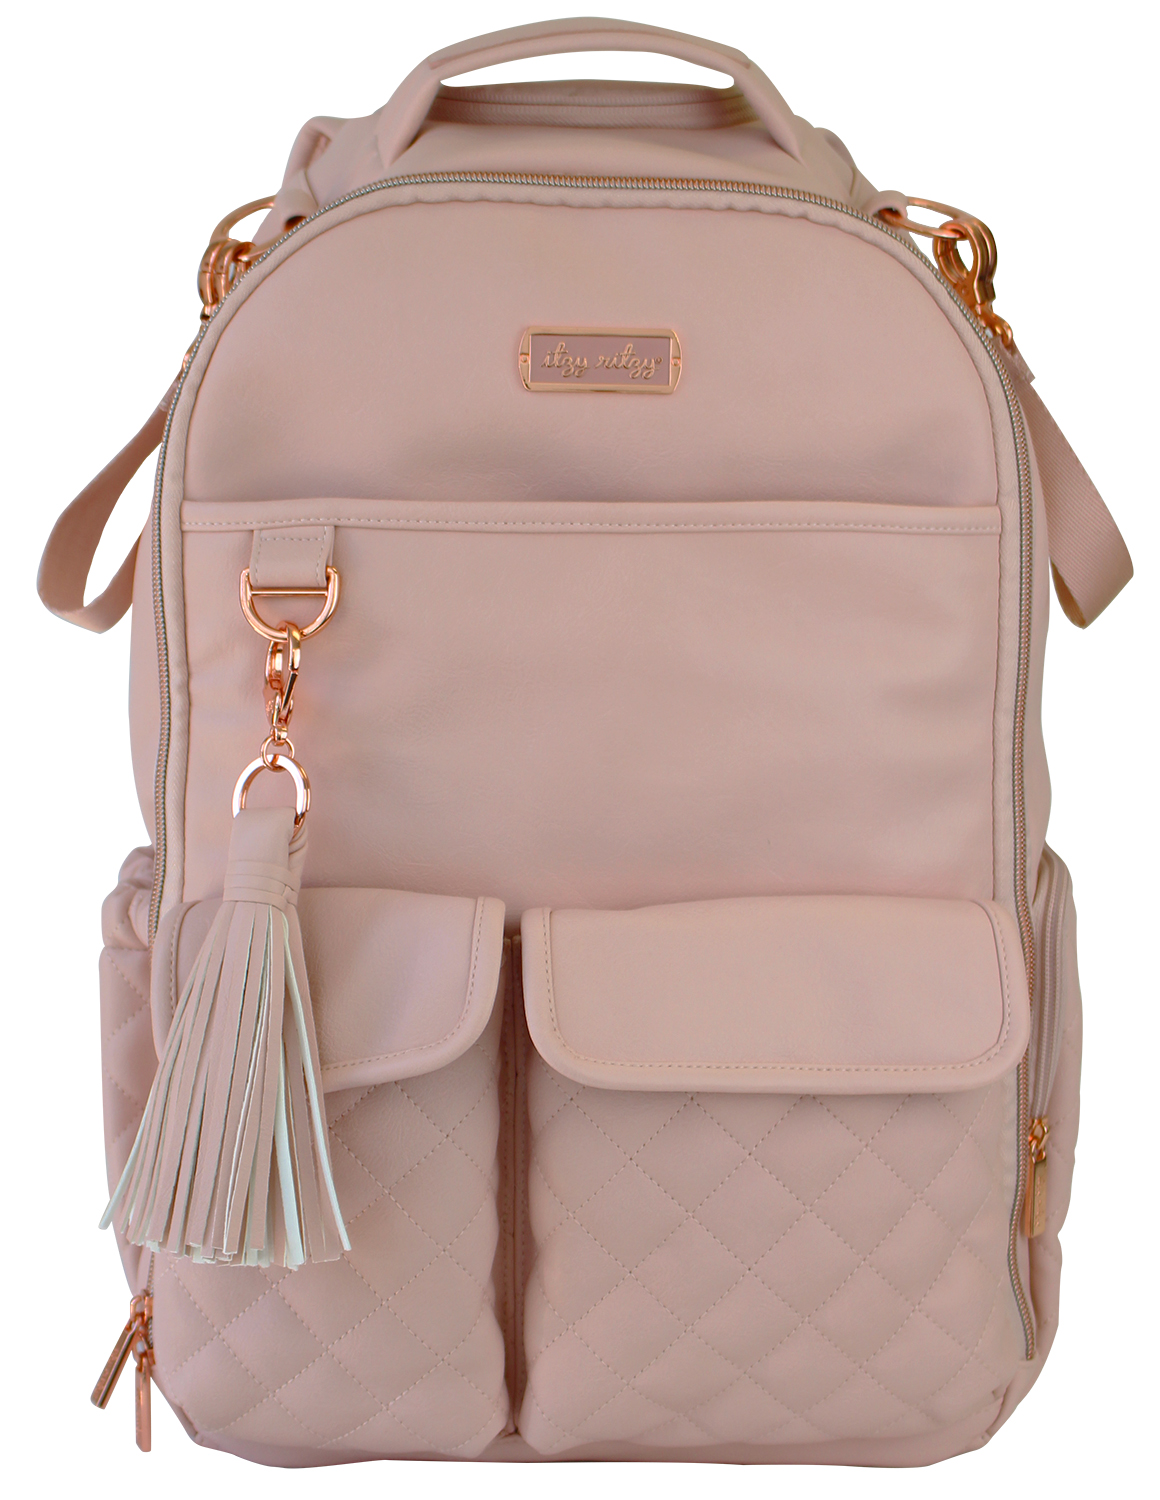 Itzy Ritzy Diaper Bag & Purse Charm Blush Keychain & Luggage Marker Features Durable Clasp & Trendy Rose Gold Hardware